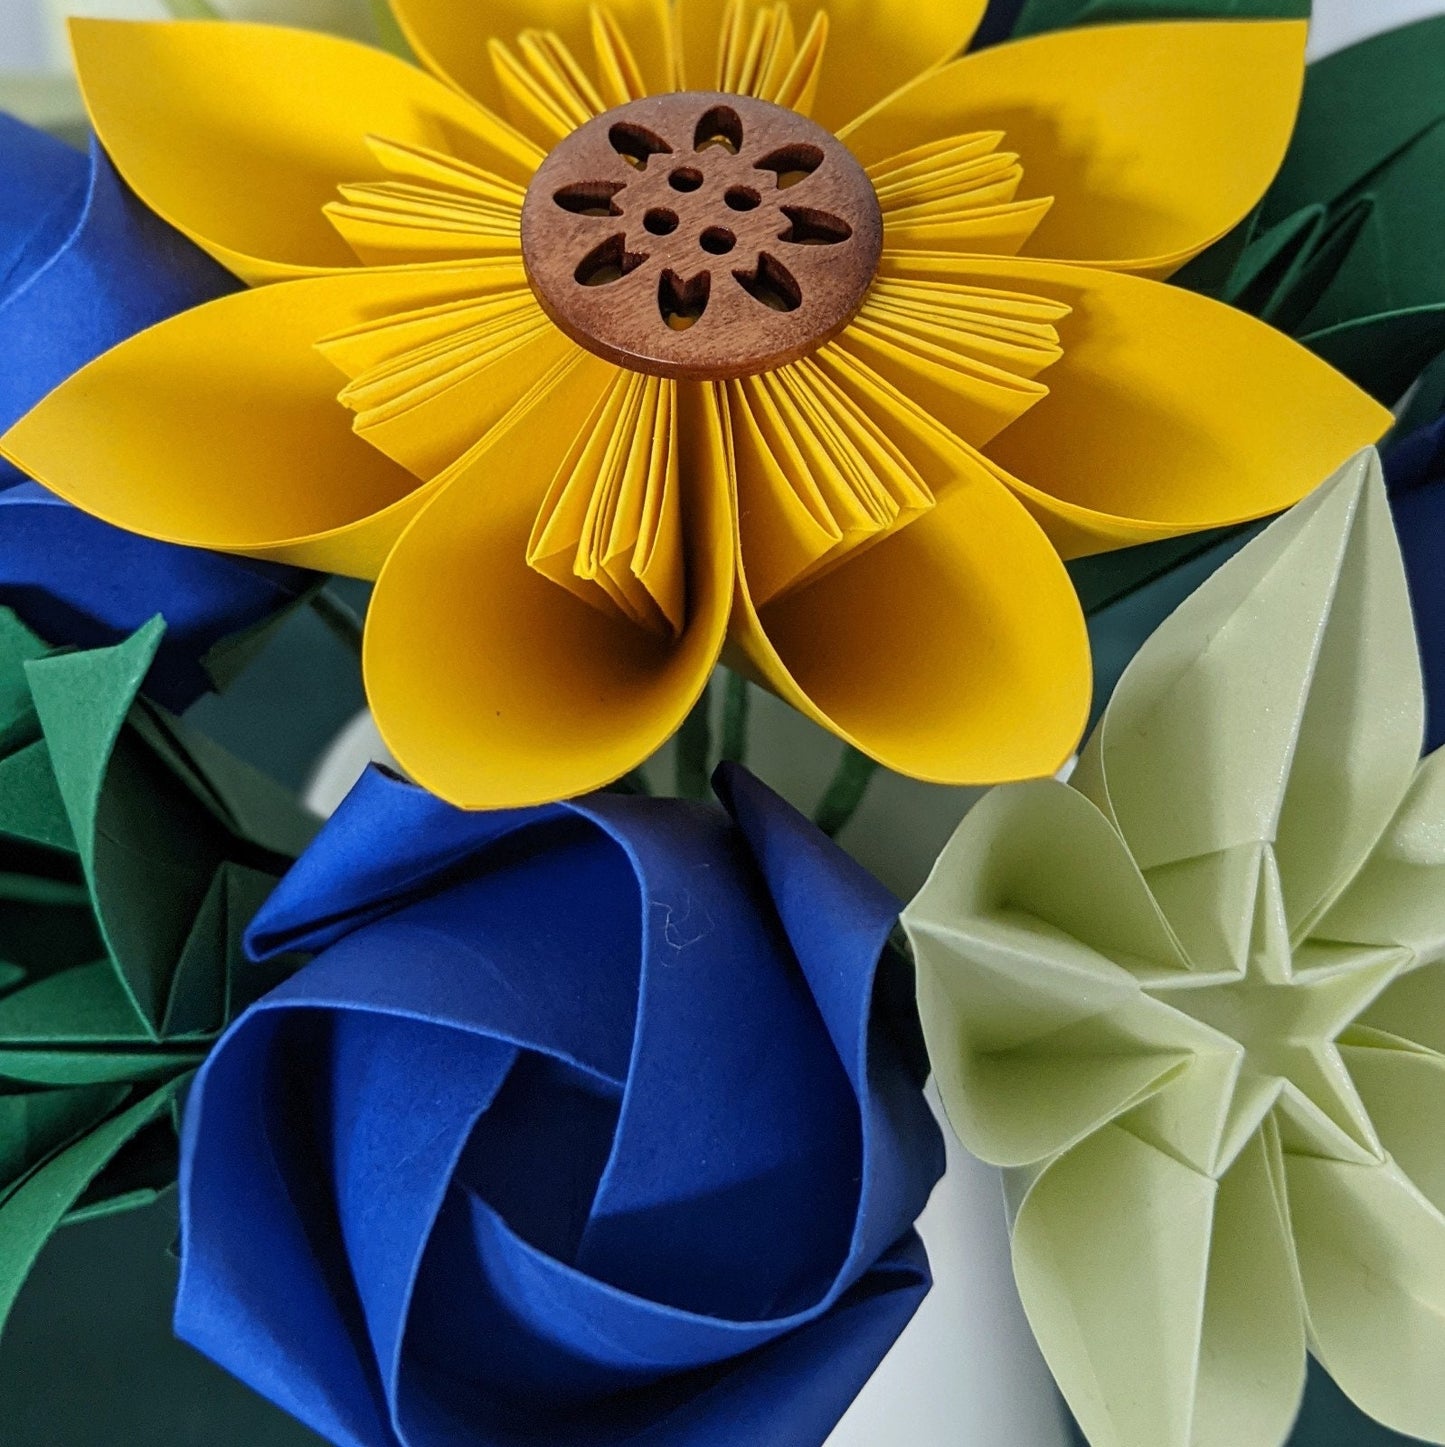 Bridesmaid's origami paper bouquet with sunflower